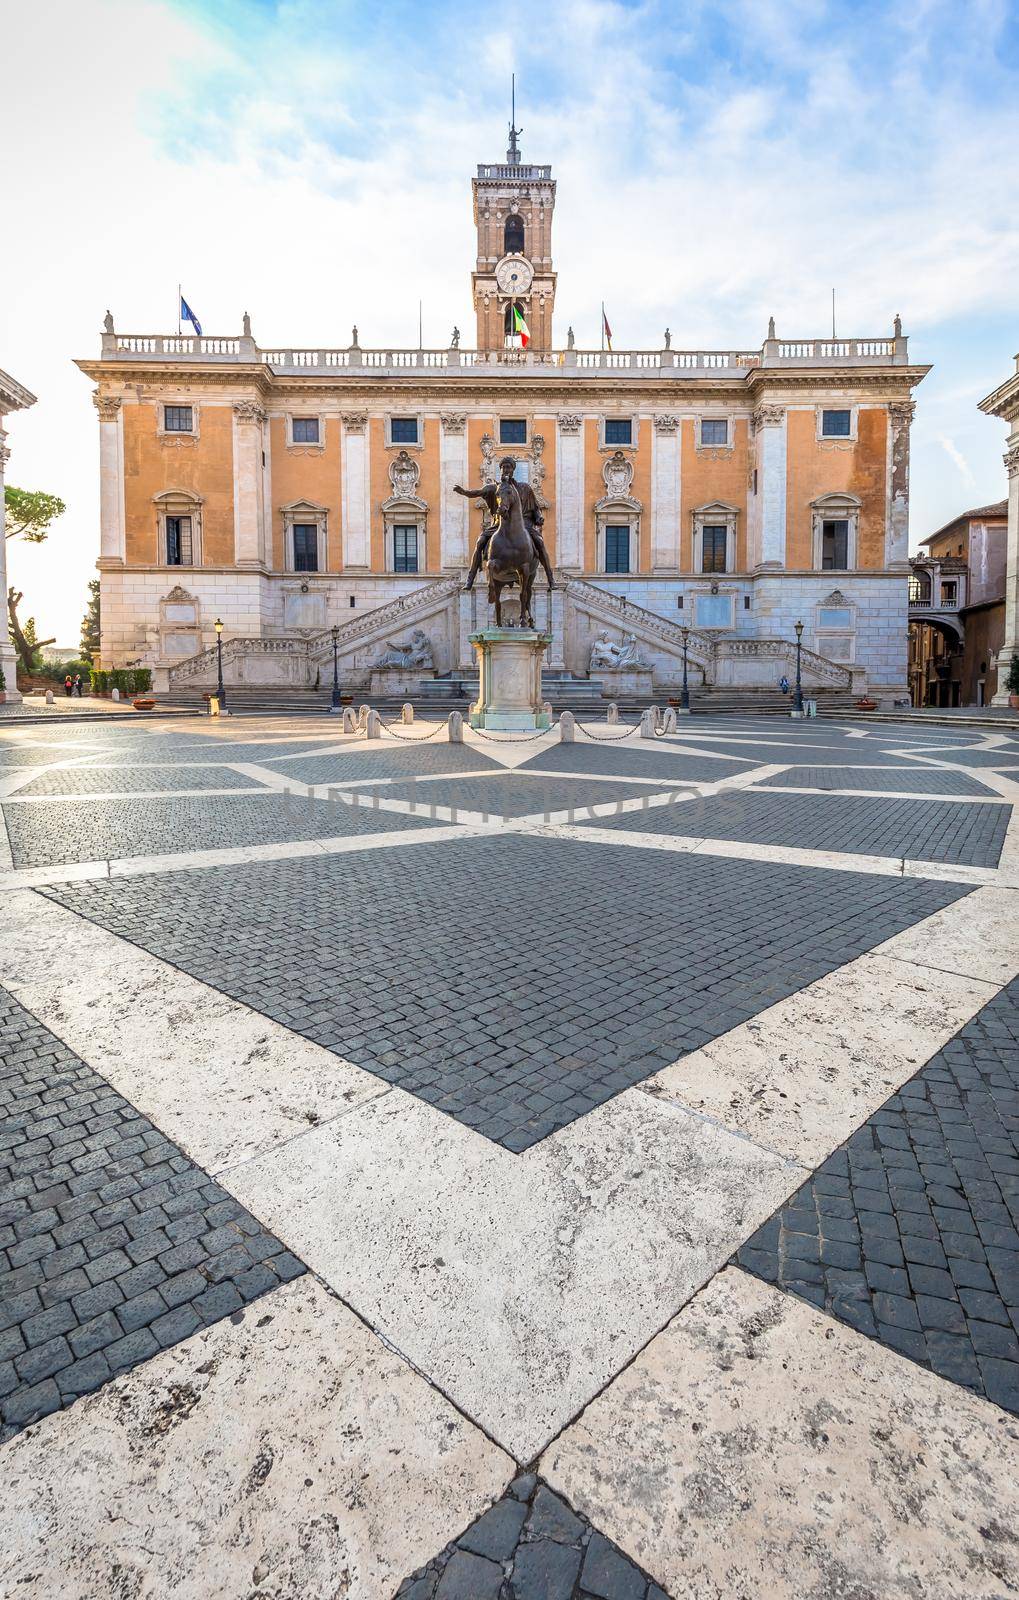 Capitolium Square (Piazza del Campidoglio) in Rome, Italy. Made by Michelangelo, it is home of Rome (Roma) City Hall by Perseomedusa